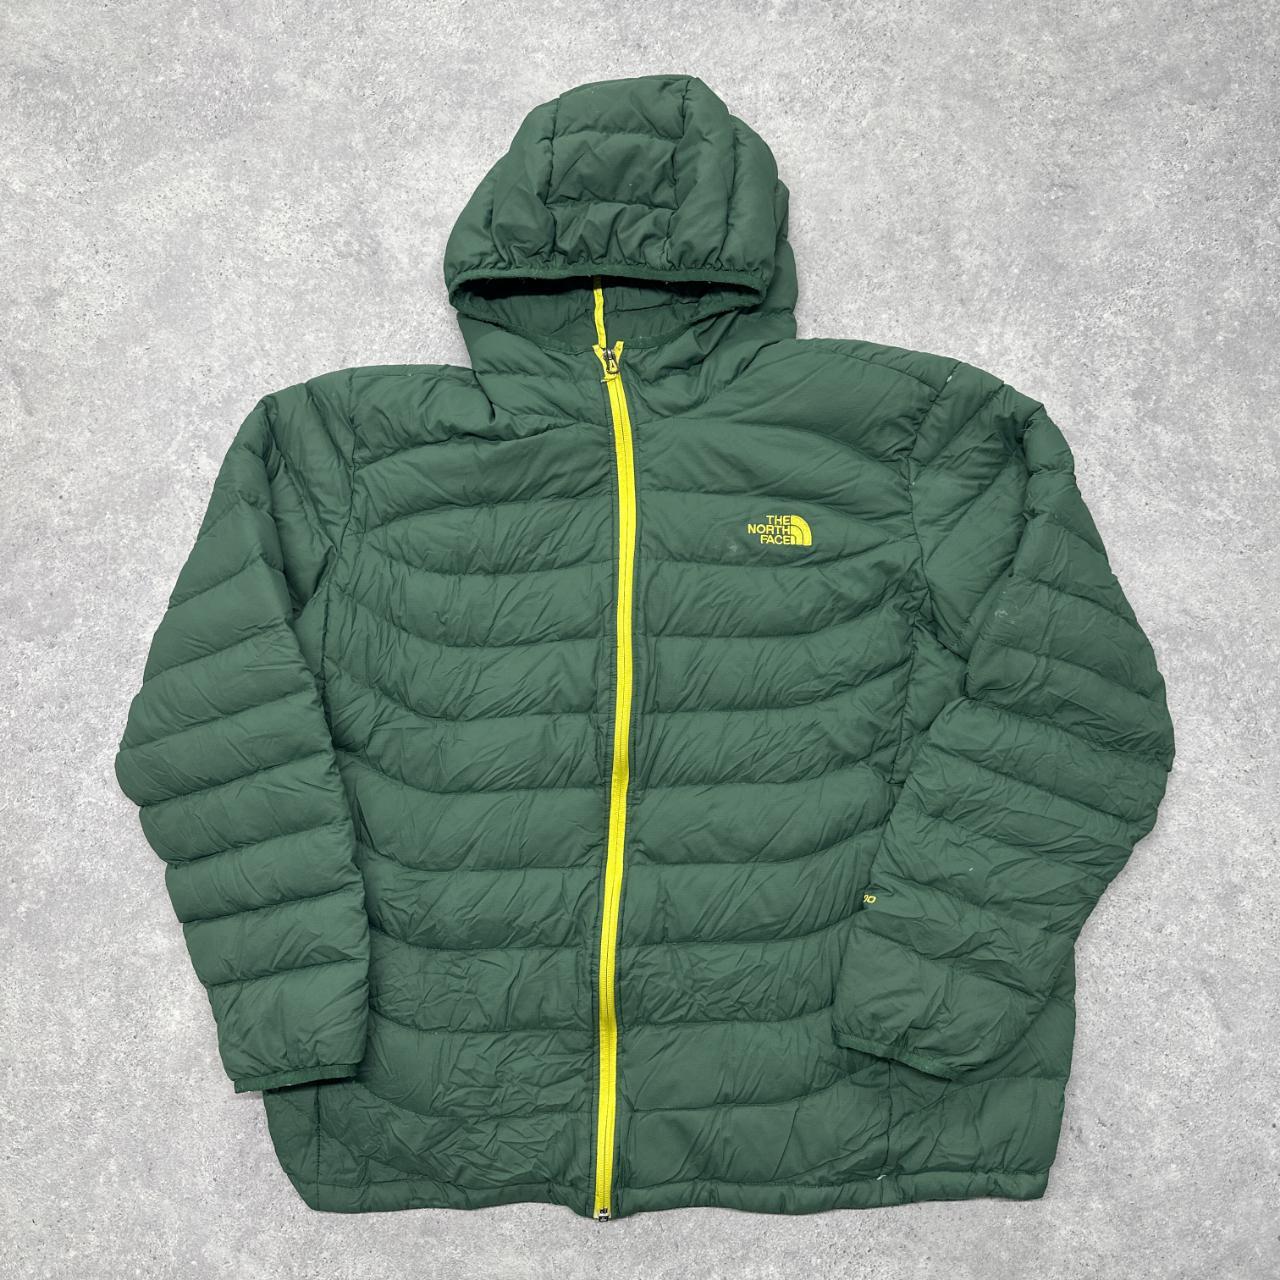 GREEN THE NORTH FACE PUFFER JACKET BRANDED... - Depop